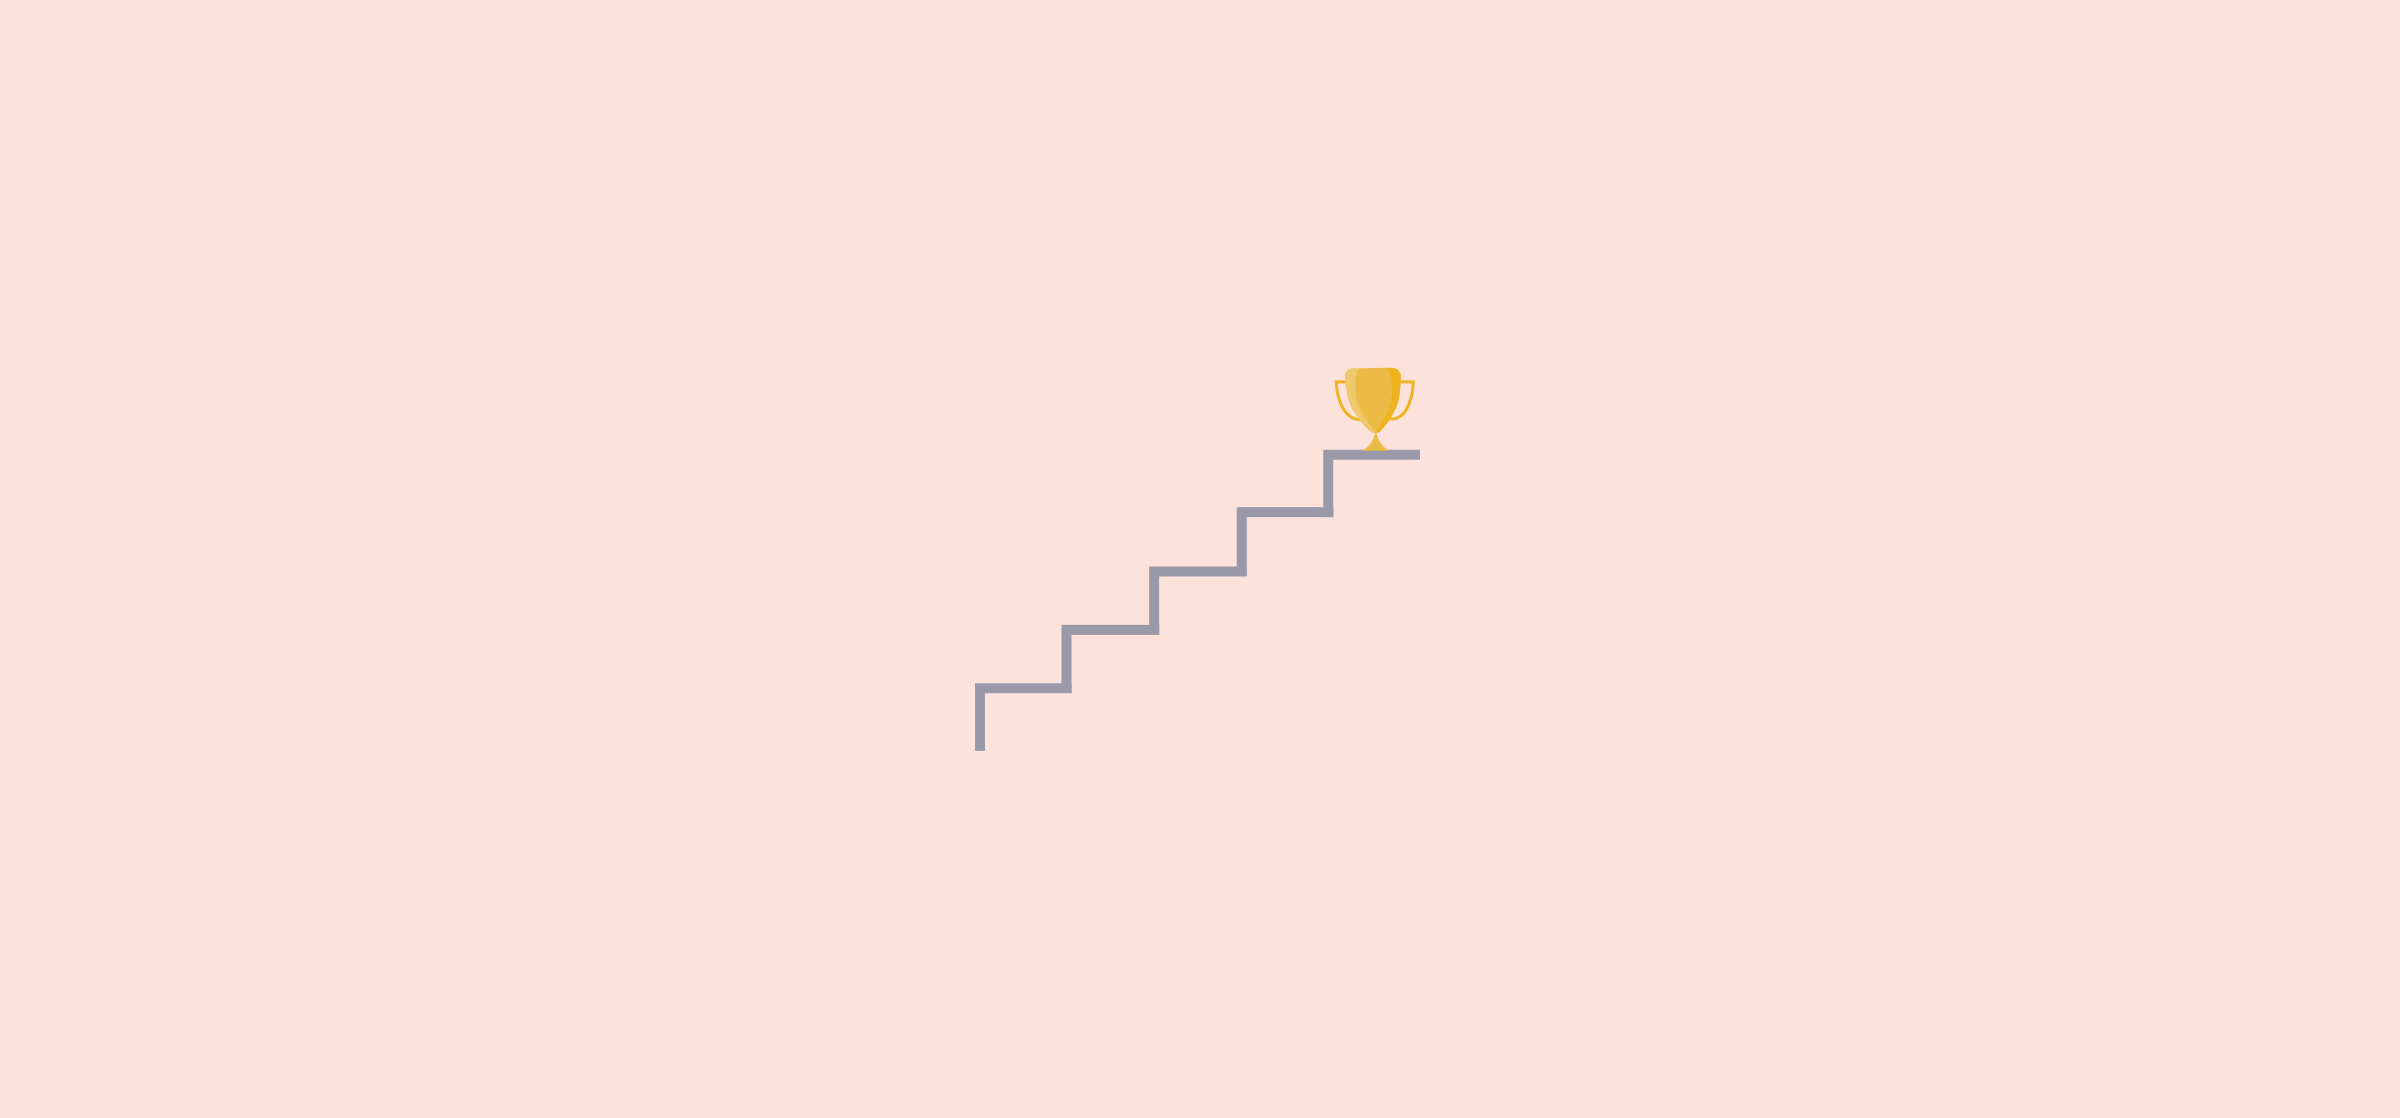 A staircase leading up to a trophy